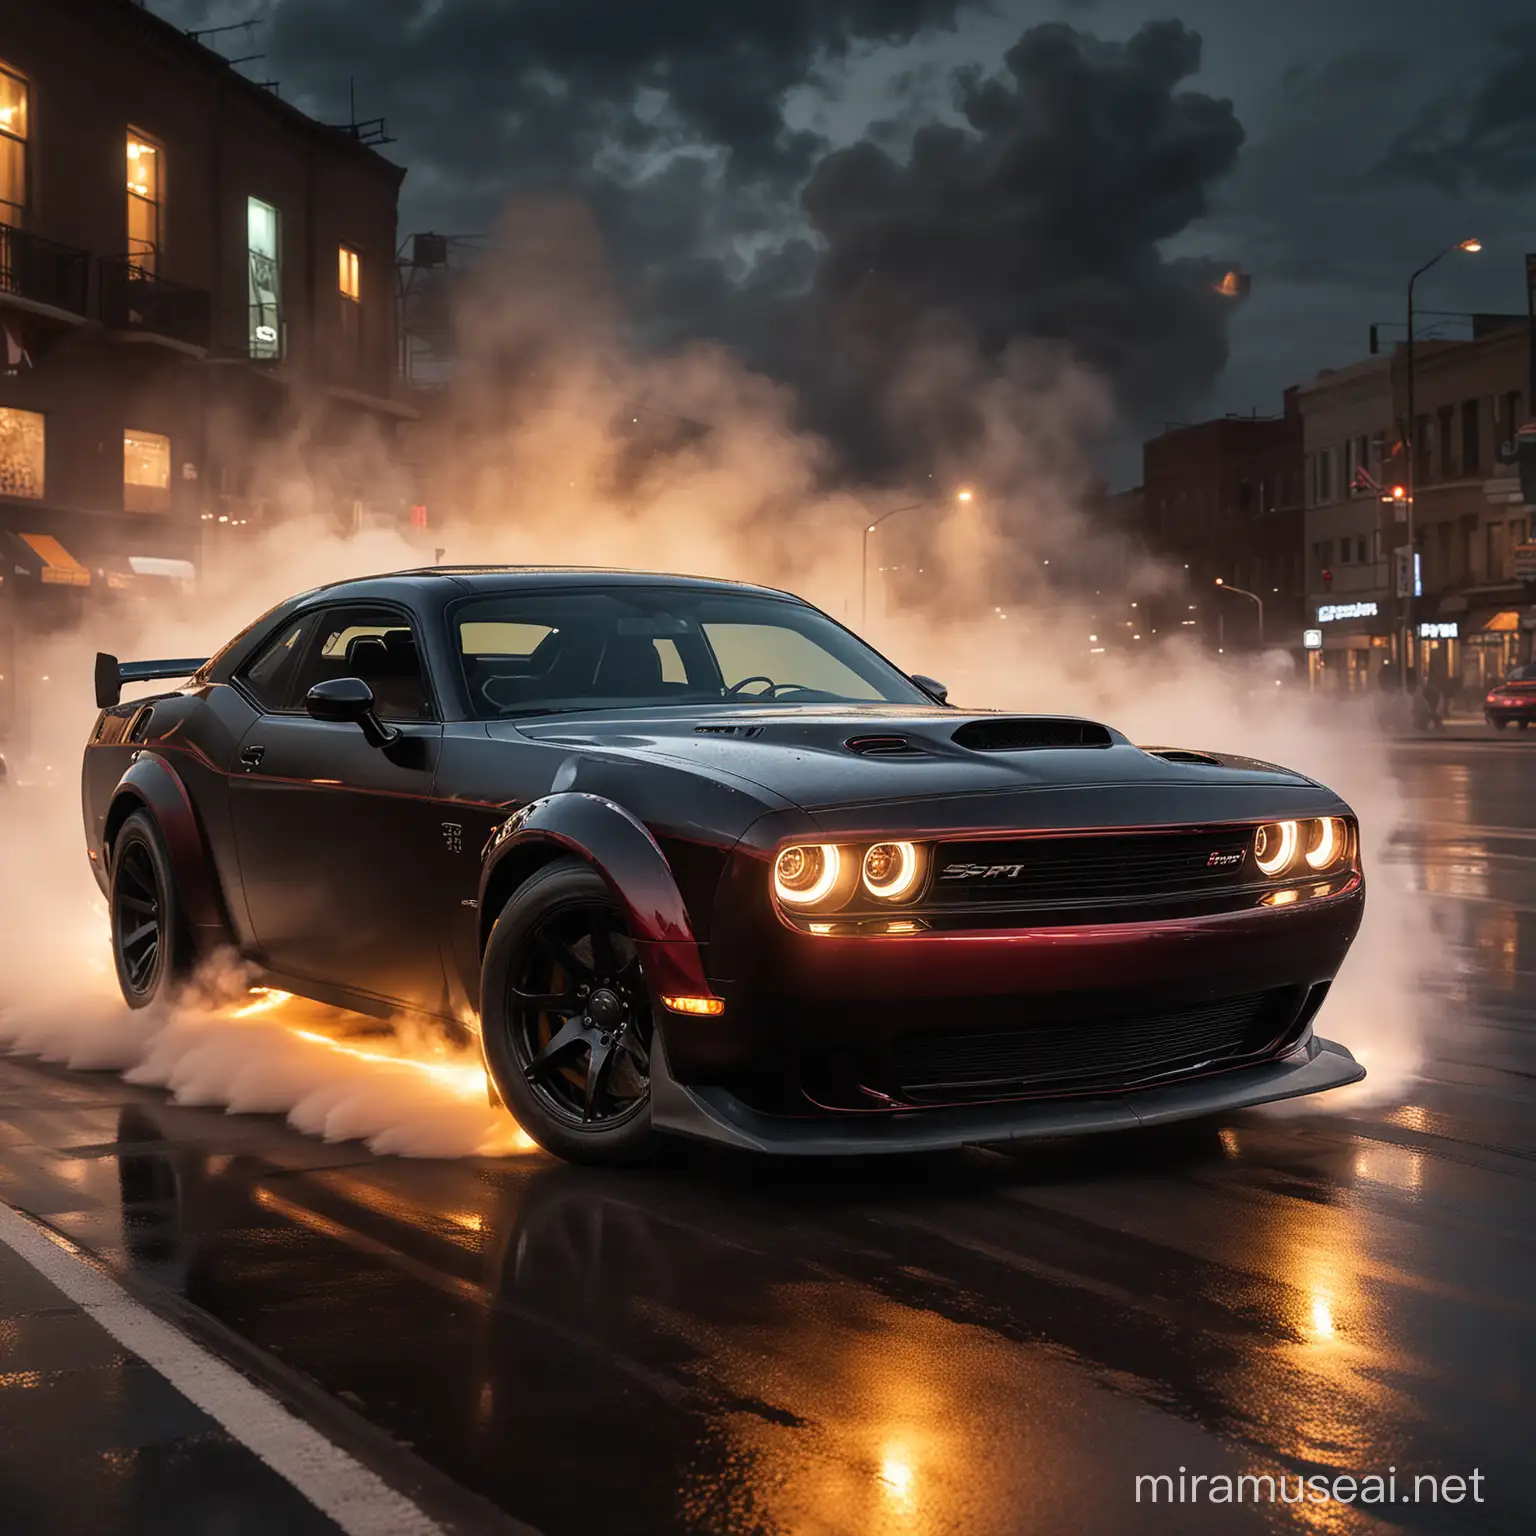 
Title: "Spectacular SRT Demon Drift"

Description: "Create an electrifying scene featuring a Dodge Challenger SRT Demon roaring through the asphalt, radiating sheer power and style. The focus is on capturing the essence of speed, dominance, and precision. The car should be depicted in a super sleek and futuristic style, gleaming under the vibrant lights of the urban nightscape. Dynamic lines and angles should emphasize its muscular form and performance capabilities. Furthermore, billowing clouds of black drift smoke should emanate from the rear tires, adding a dramatic touch of adrenaline to the composition. Let the artwork ignite the thrill of the race and evoke the sensation of witnessing automotive prowess in its most spectacular form.